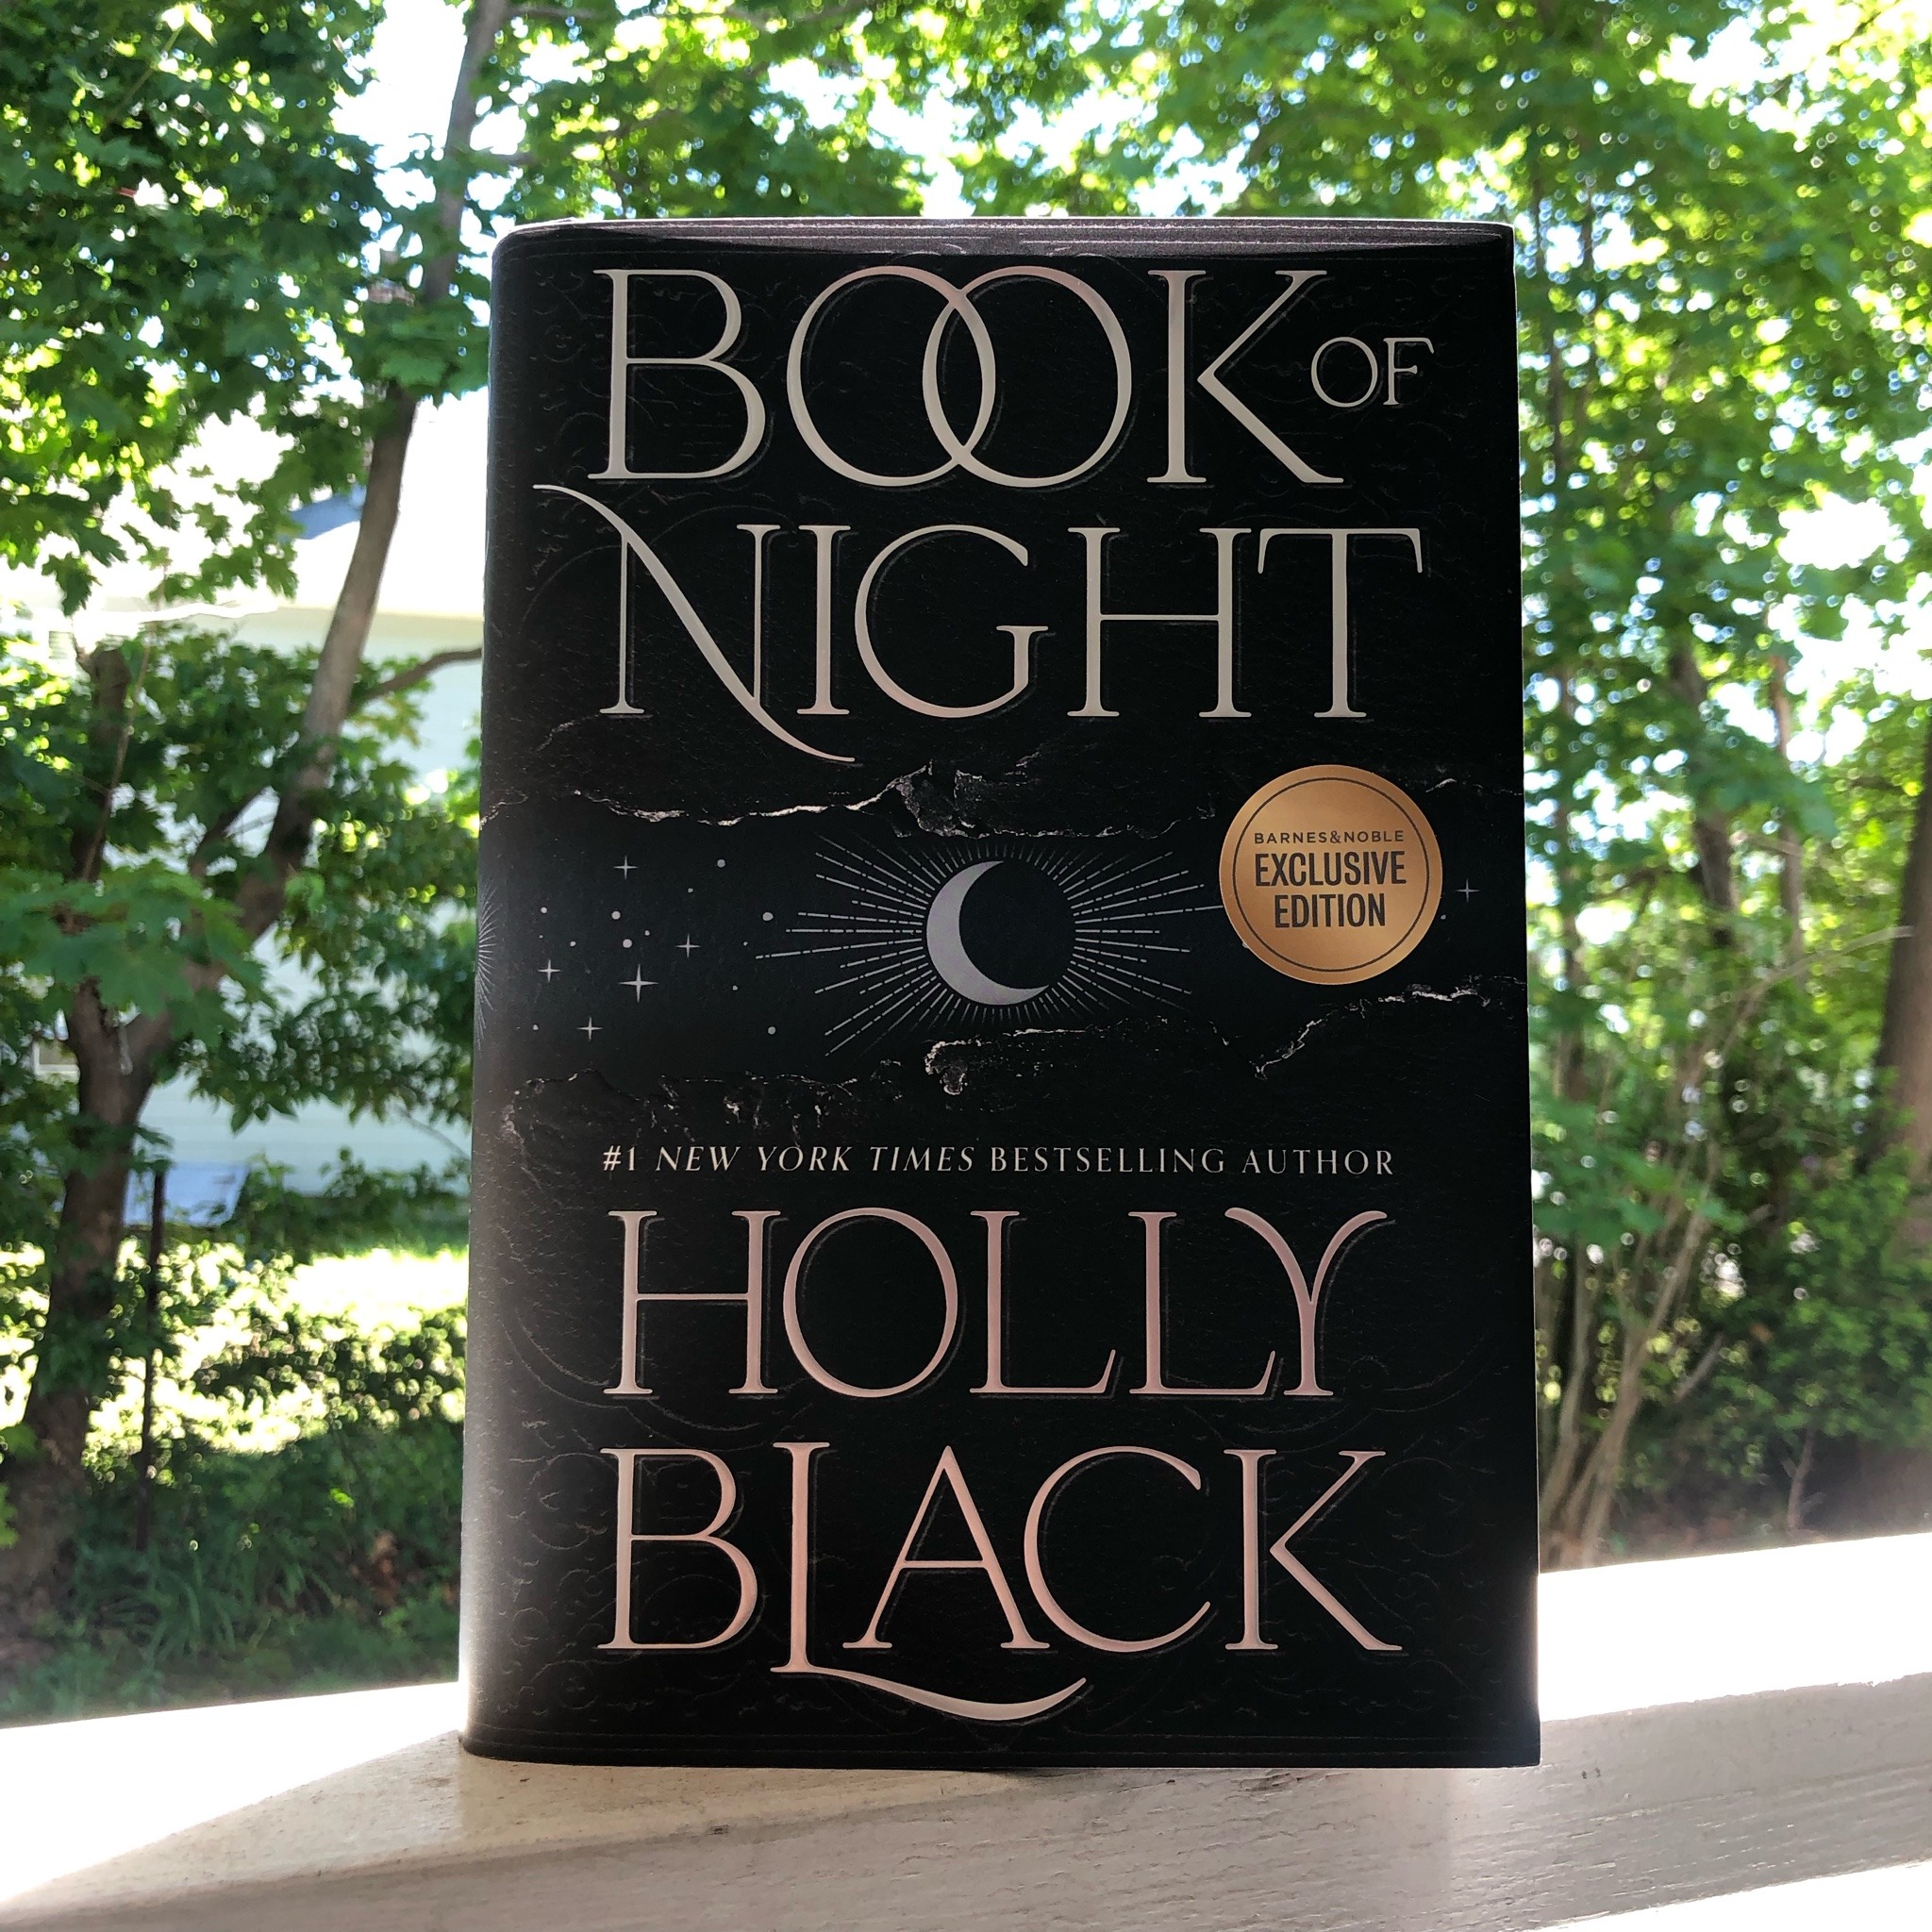 Photo of The Book if Night by Holy Black standing on a porch rail with green trees and lots of light in the background. 